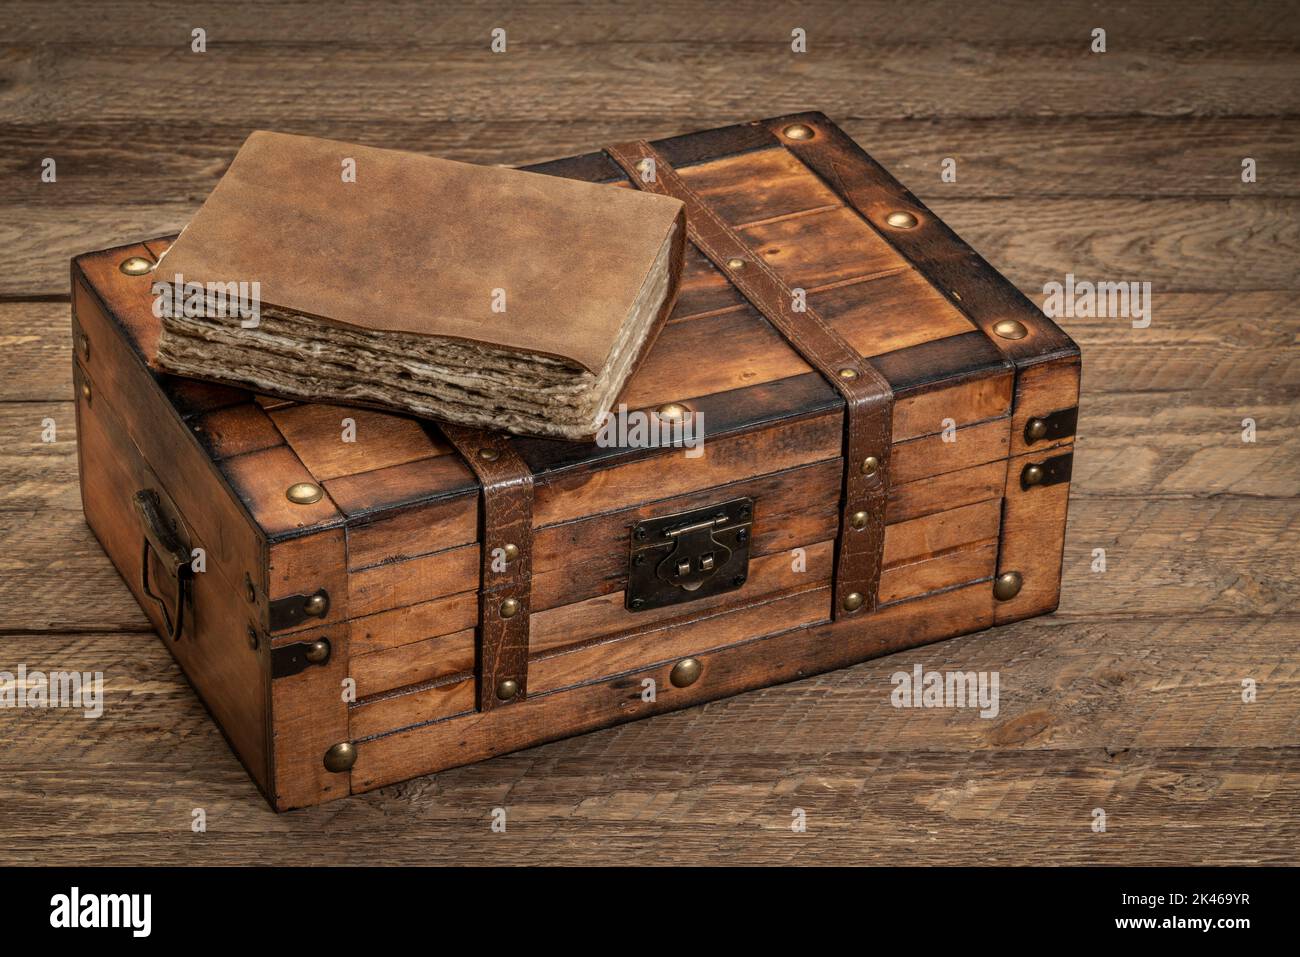 retro decorative case or storage box on wooden rustic table with am old journal or book Stock Photo